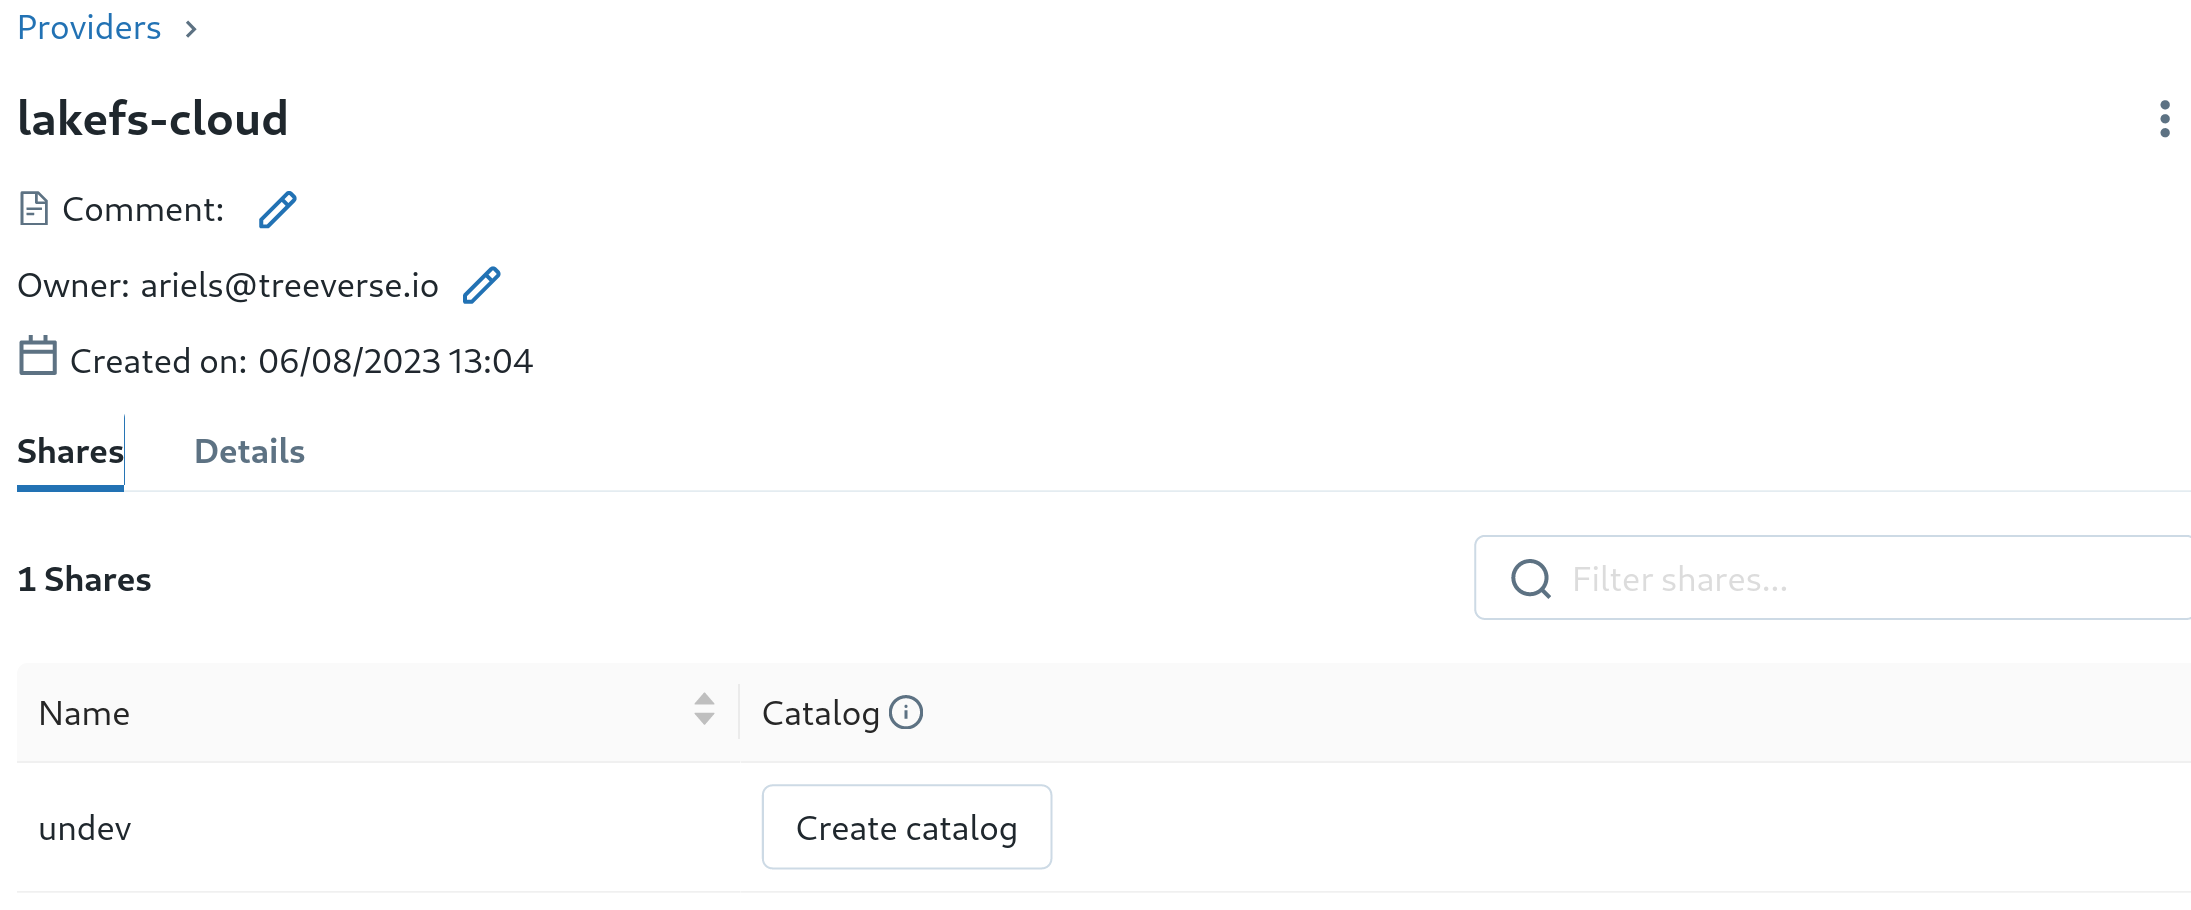 lakeFS-Cloud provider, showing share and create catalog